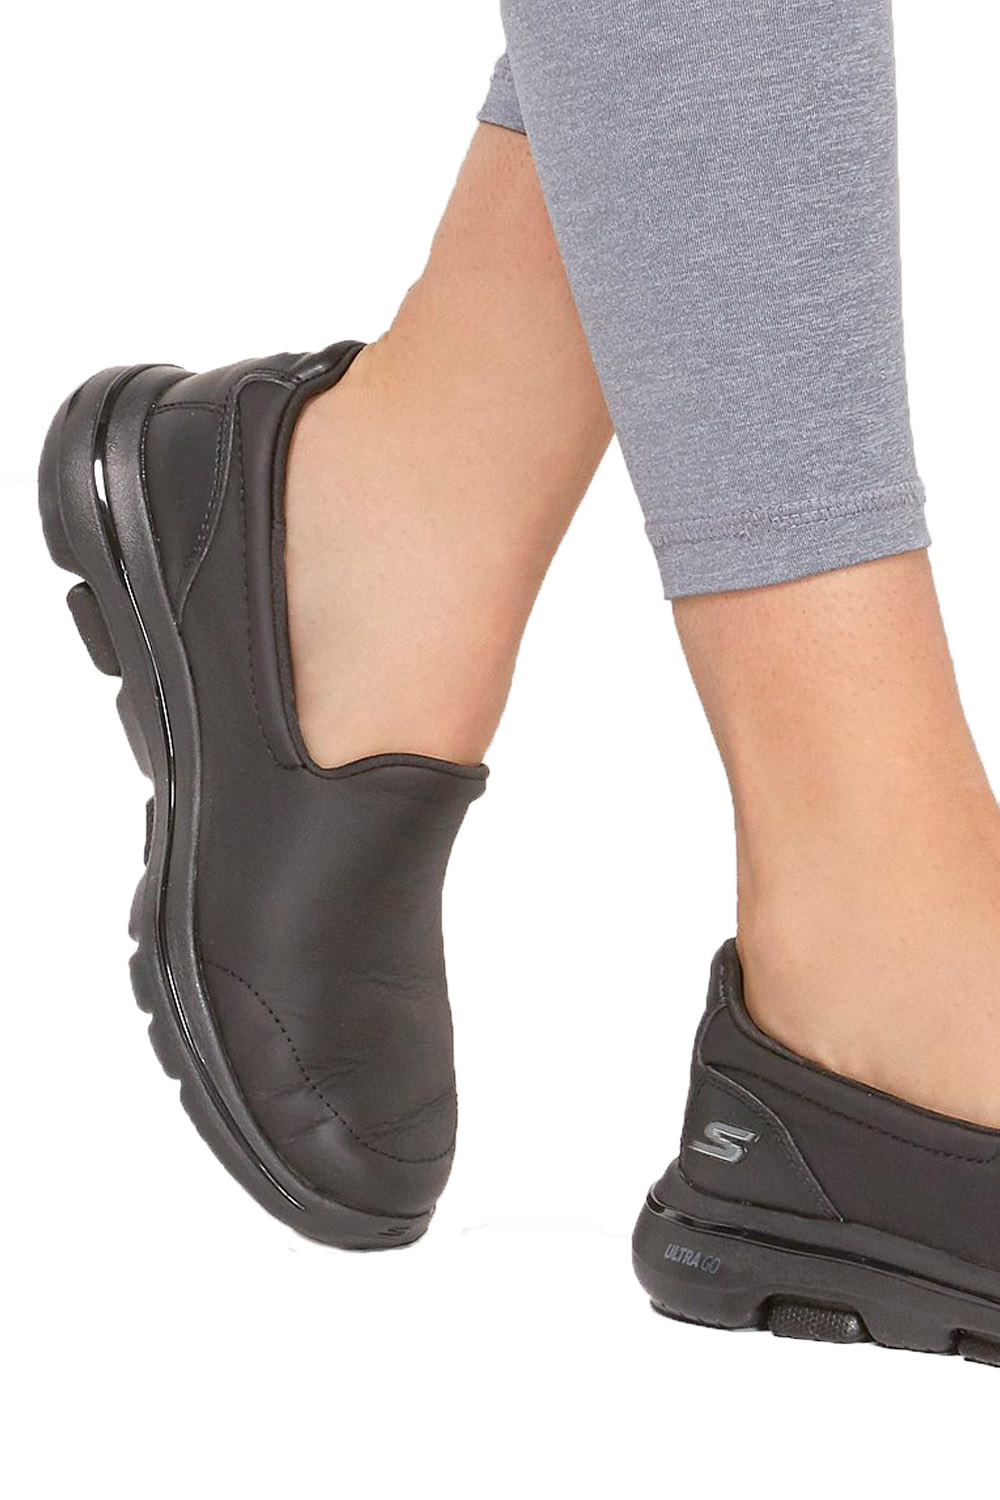 Skechers 5 Polished Womens Black Leather Casual Slip On Trainers | eBay